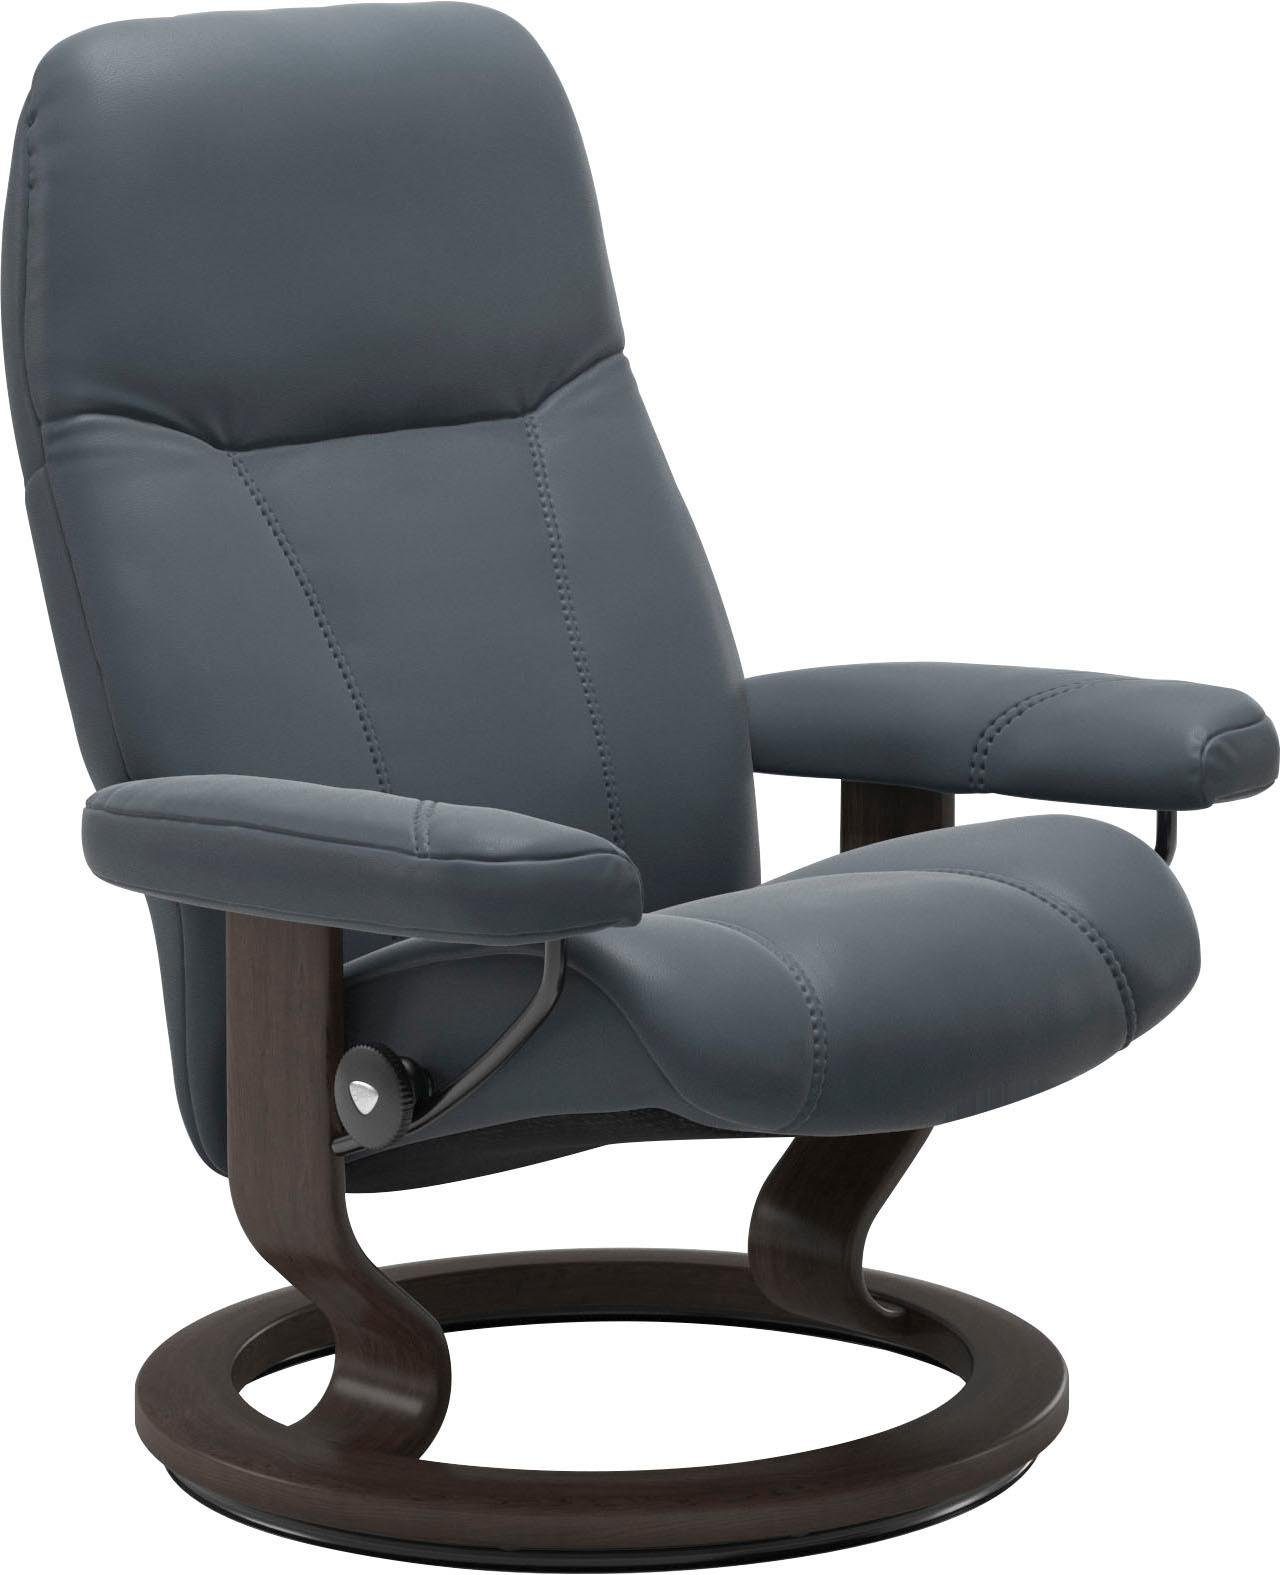 Wenge Relaxsessel Größe Gestell Consul, L, Classic mit Stressless® Base,